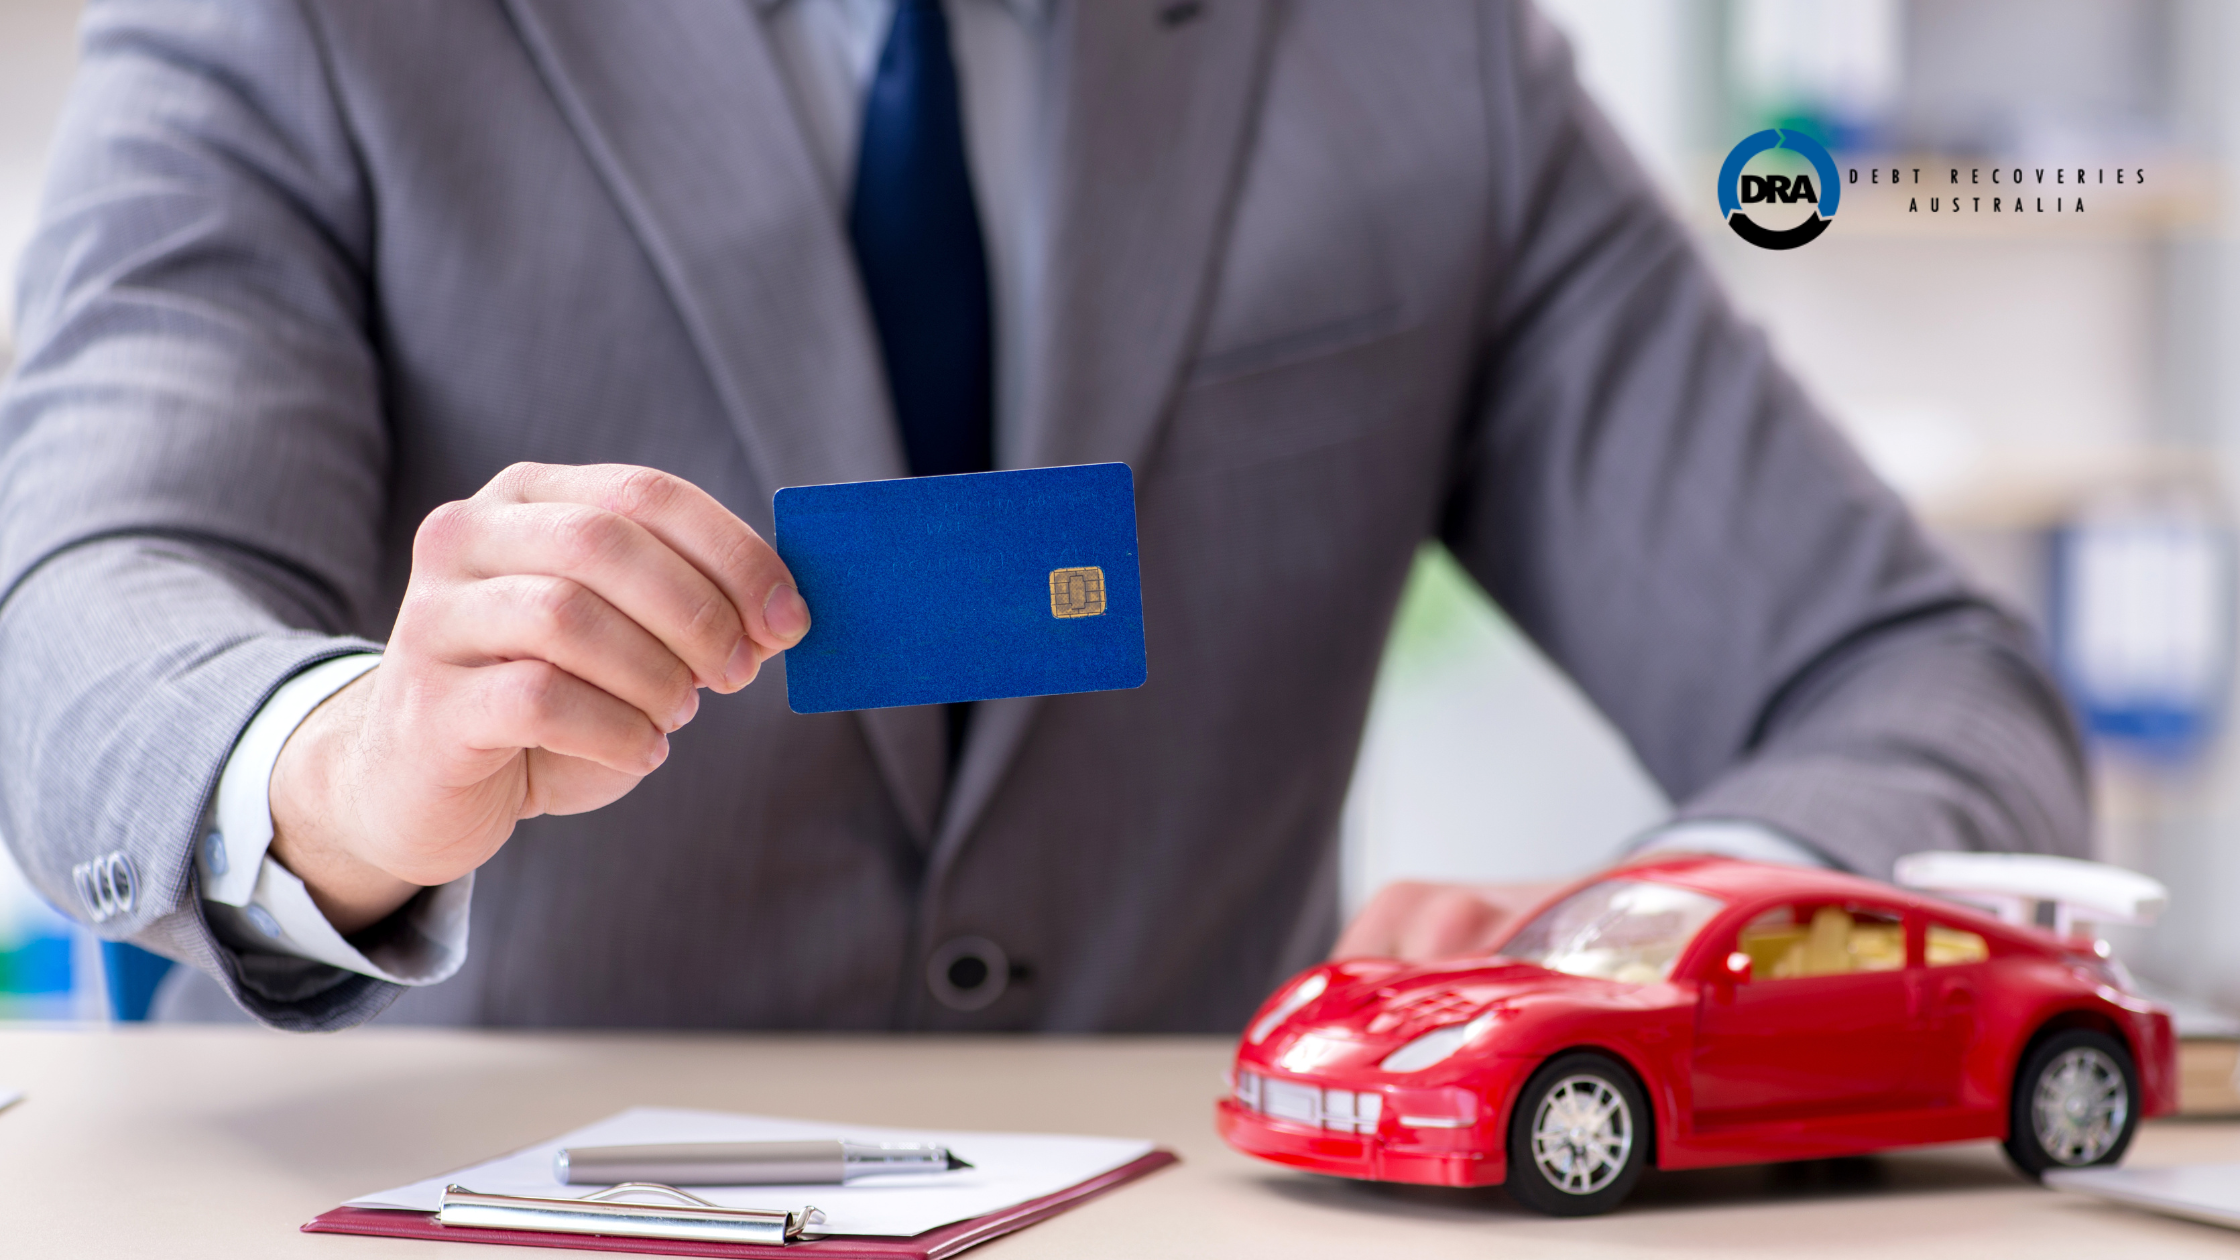 Legal Motor Vehicle Claim Recovery with Debt Recoveries Australi